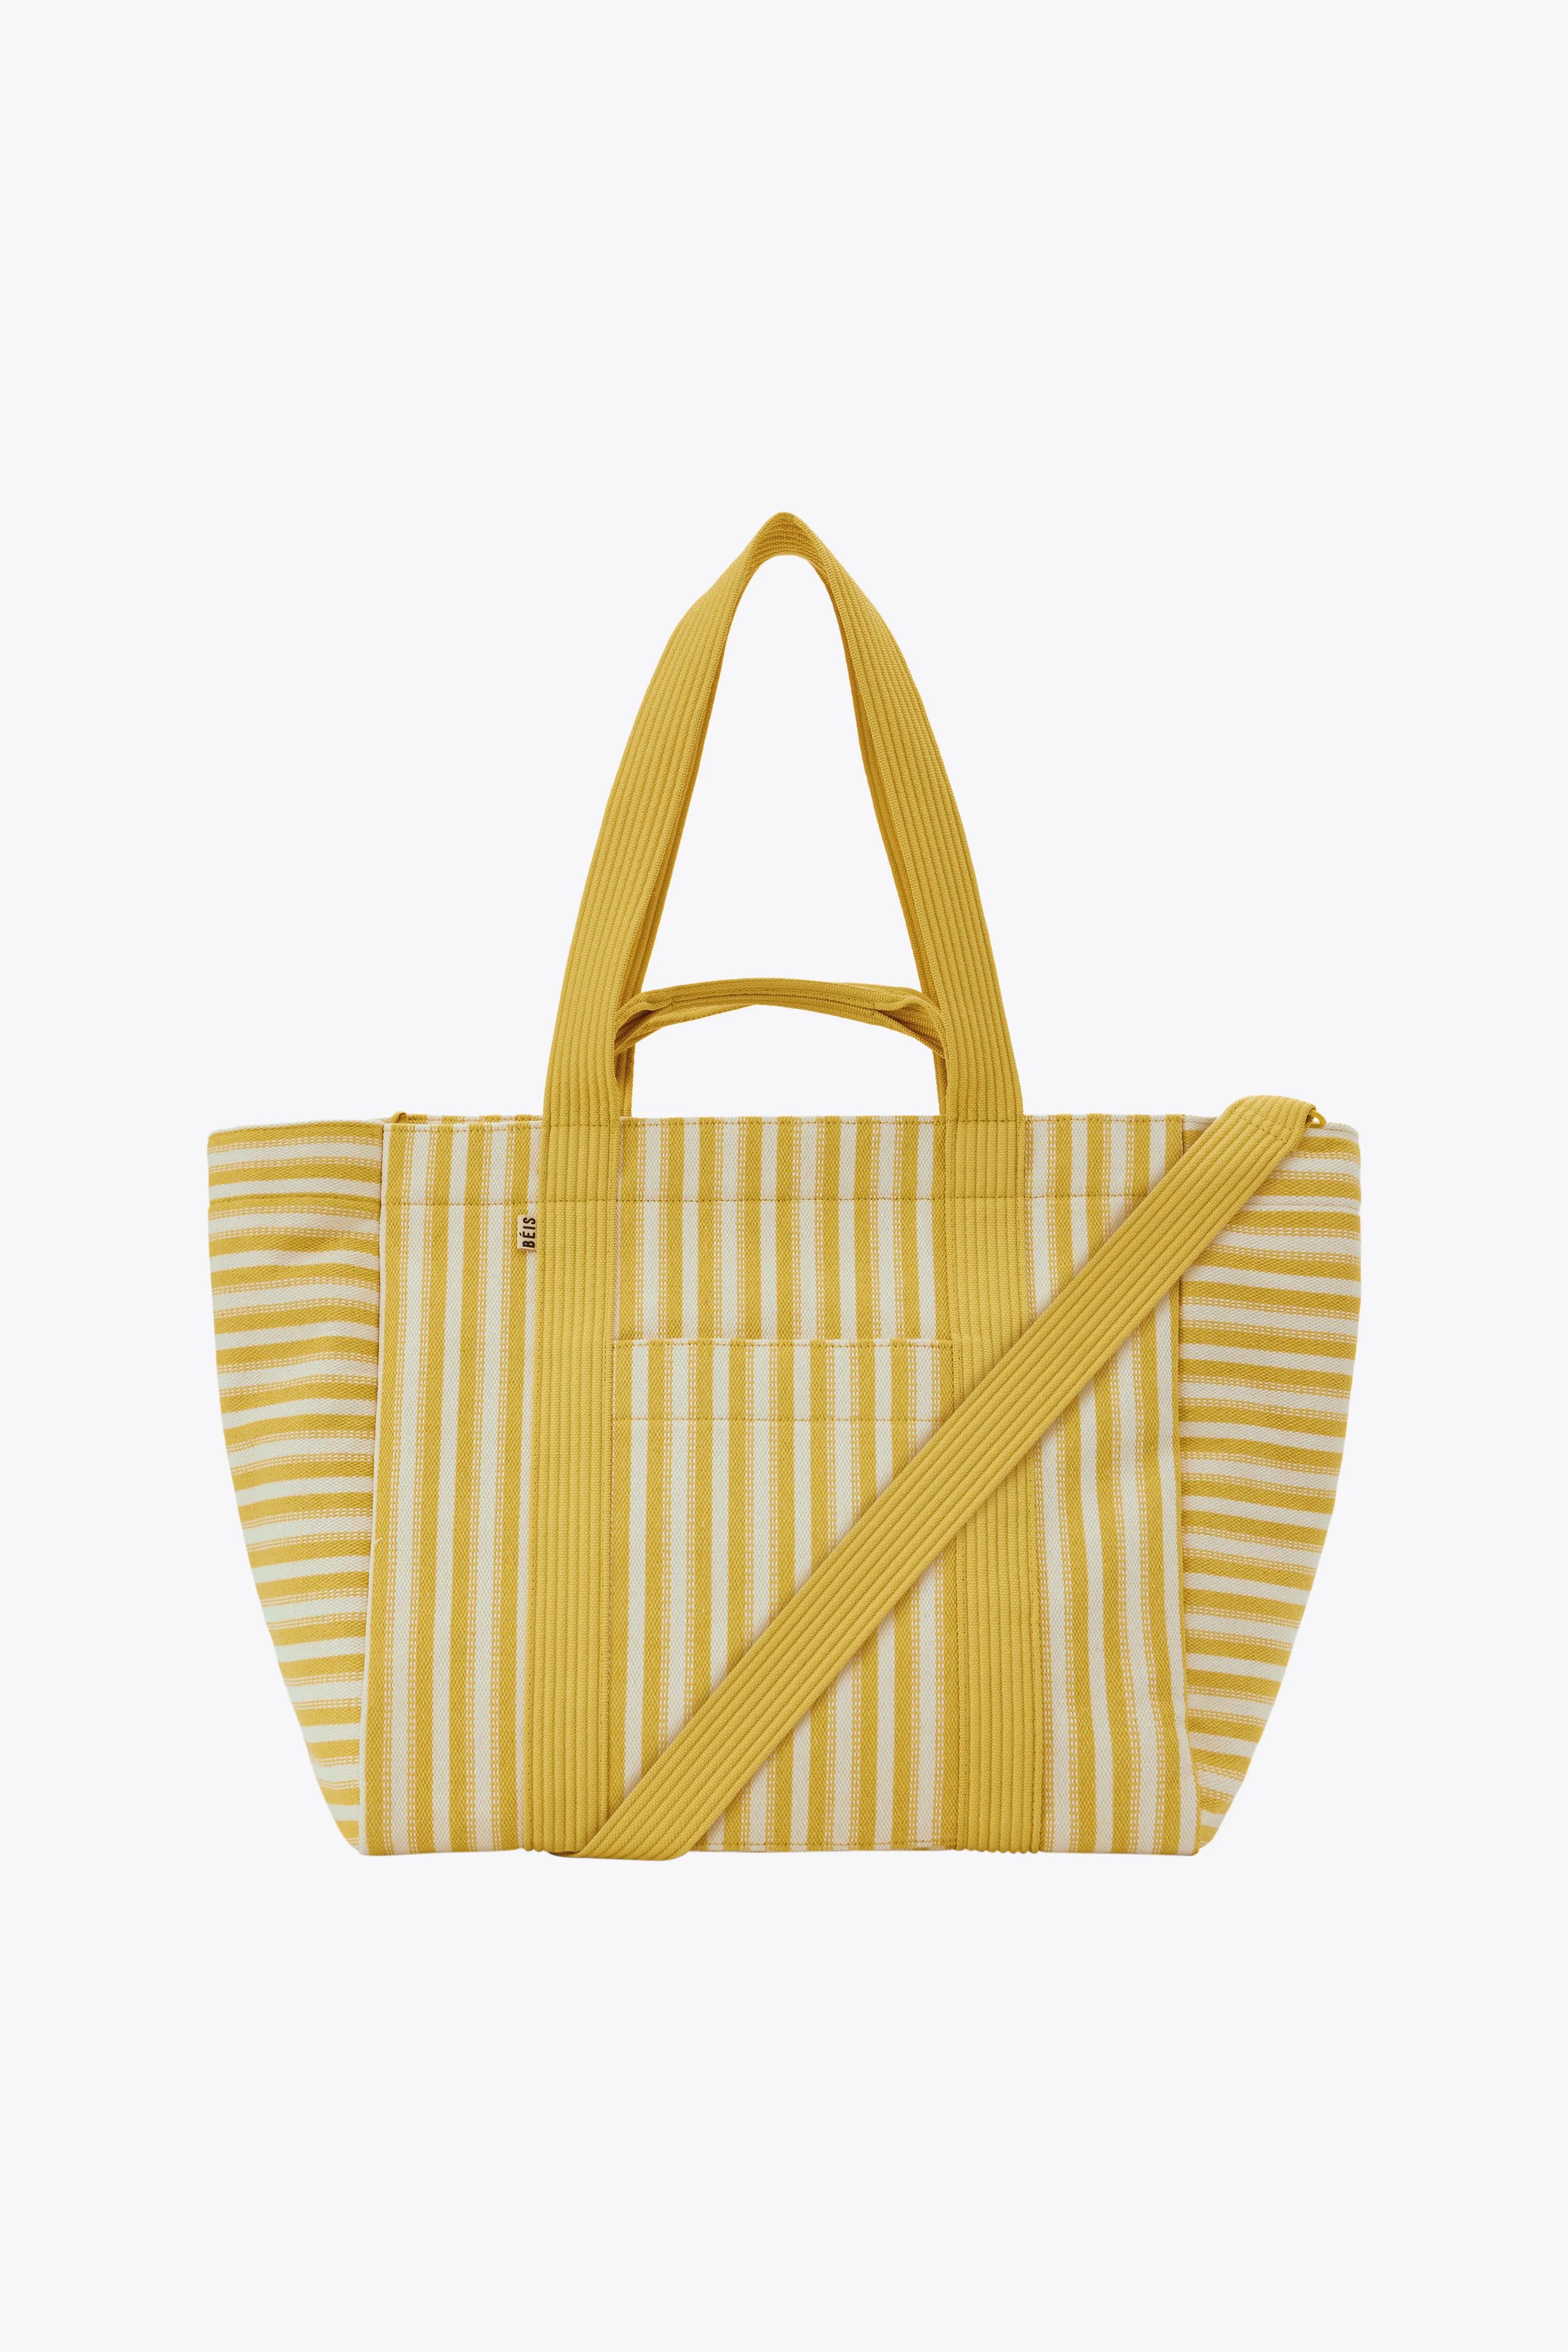 BÉIS 'The Vacation Tote' in Honey Stripe - Vacation Tote & Summer Tote Bag in Yellow Striped | BÉIS Travel